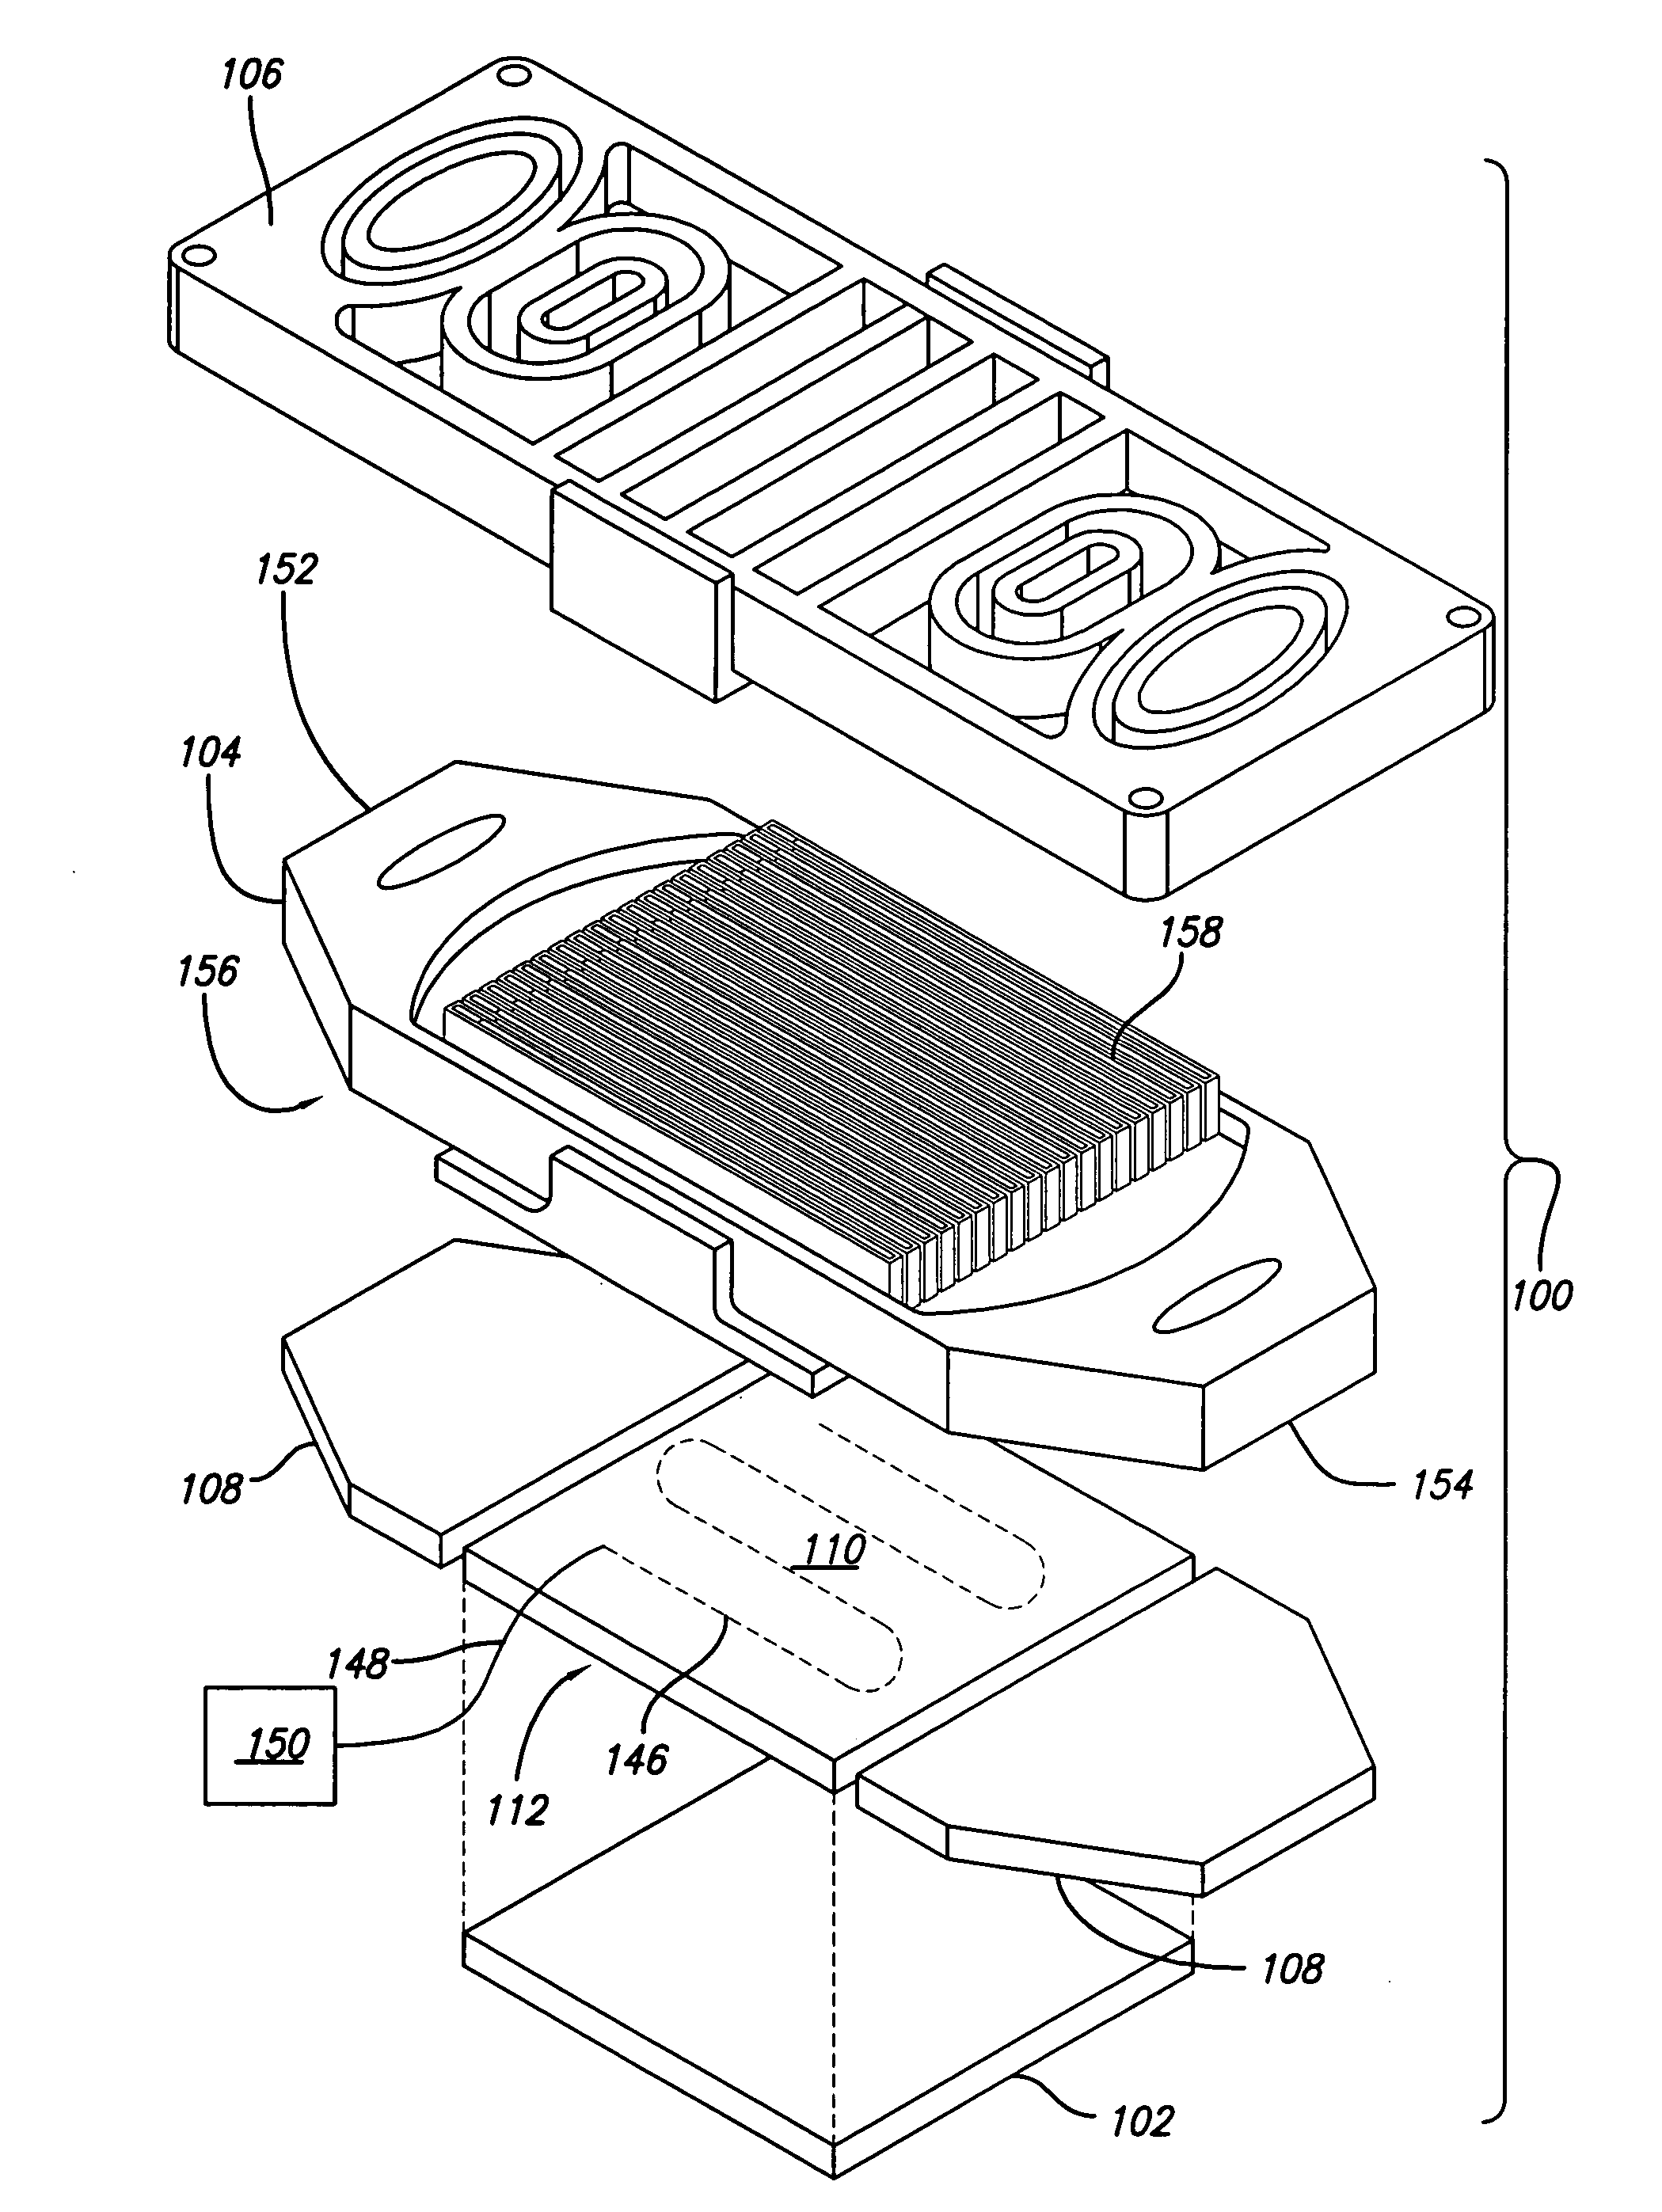 Active thermal control system with miniature liquid-cooled temperature control device for electronic device testing